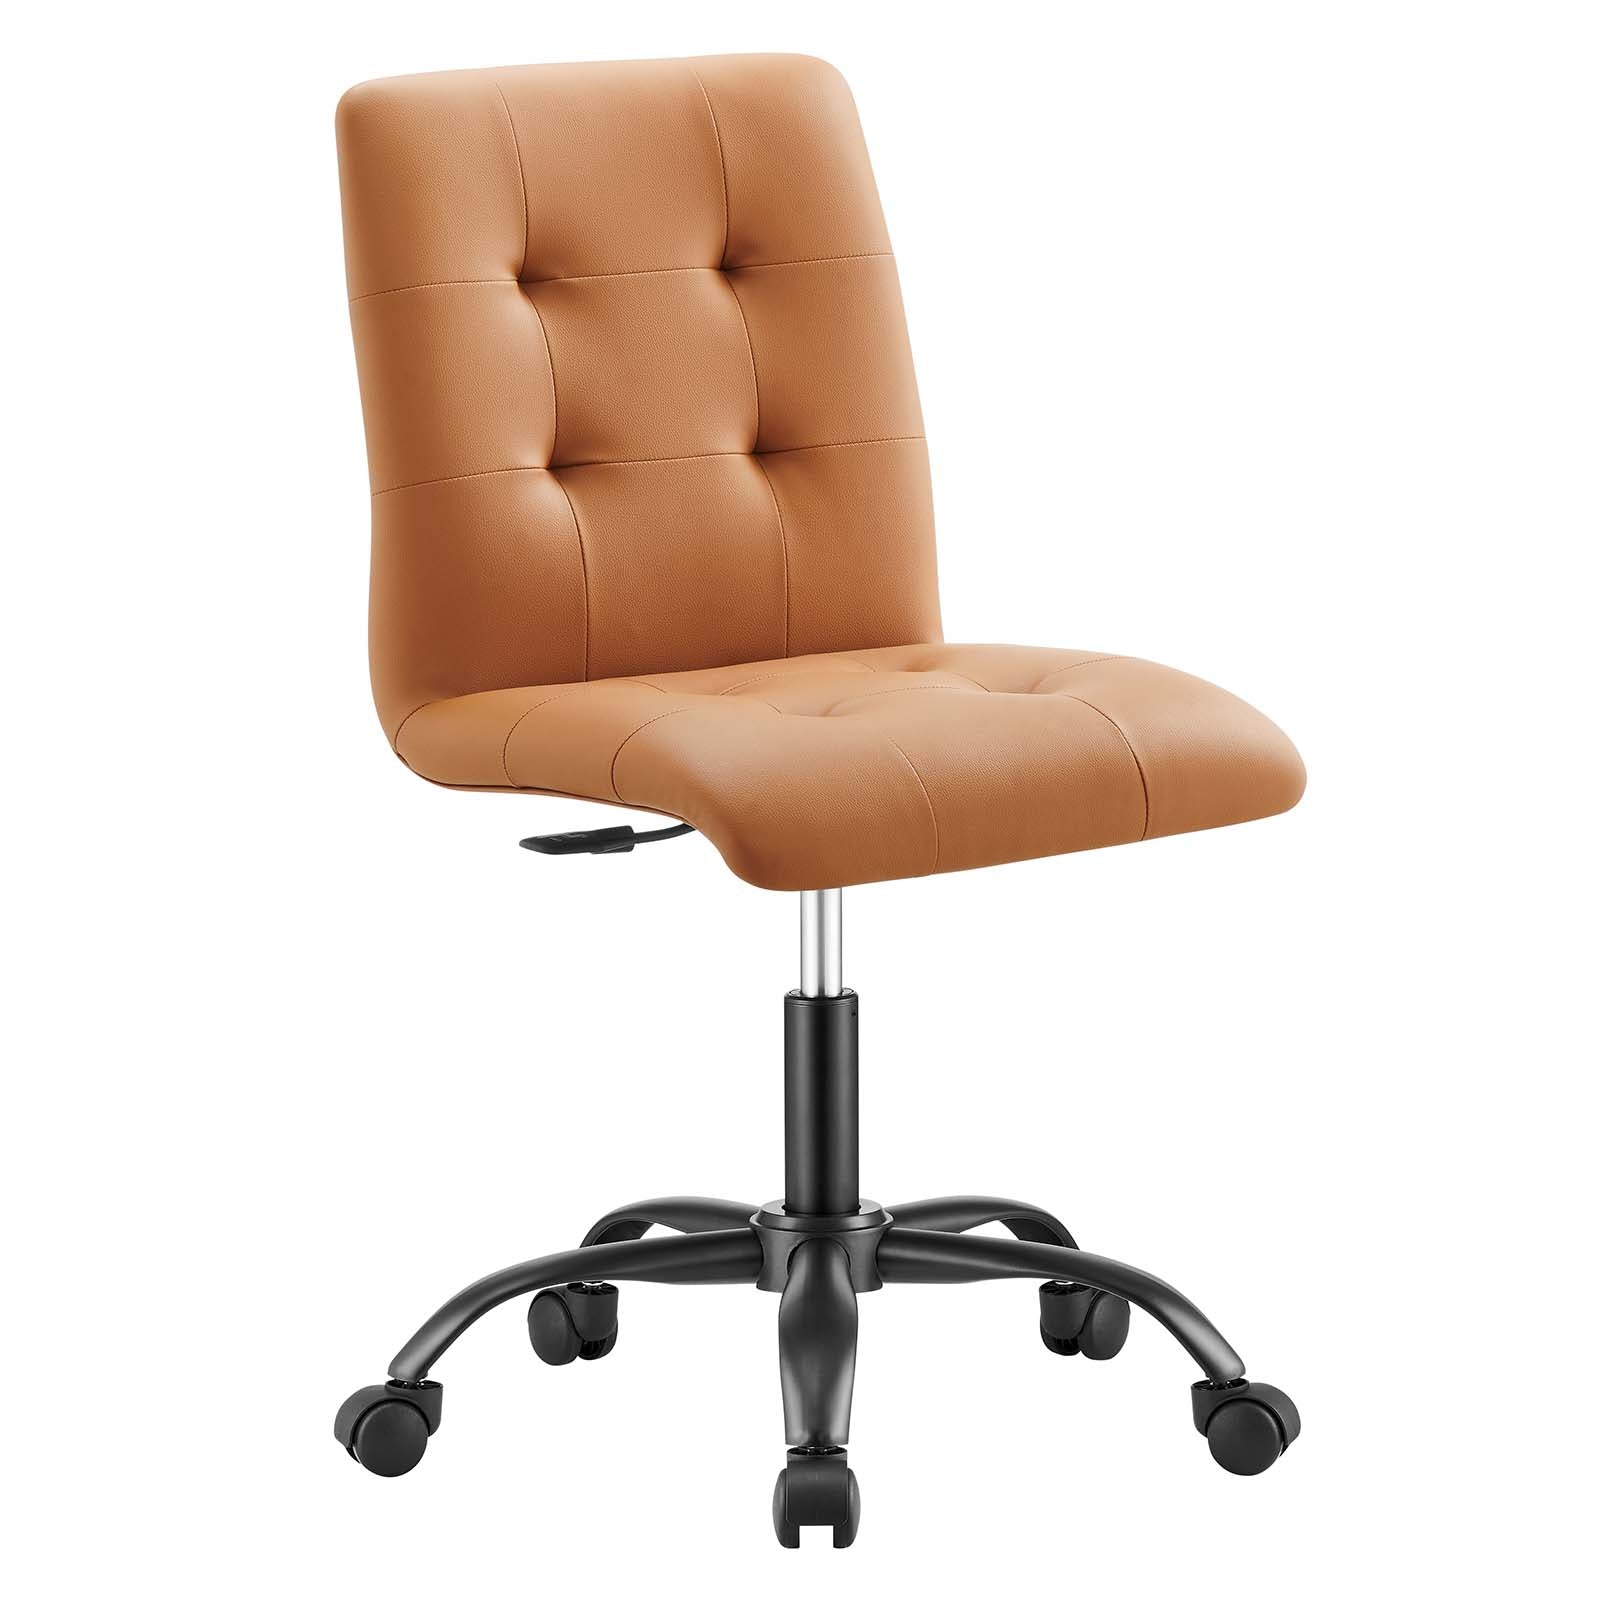 Modway Task Chairs - Prim-Armless-Vegan-Leather-Office-Chair-Black-Tan